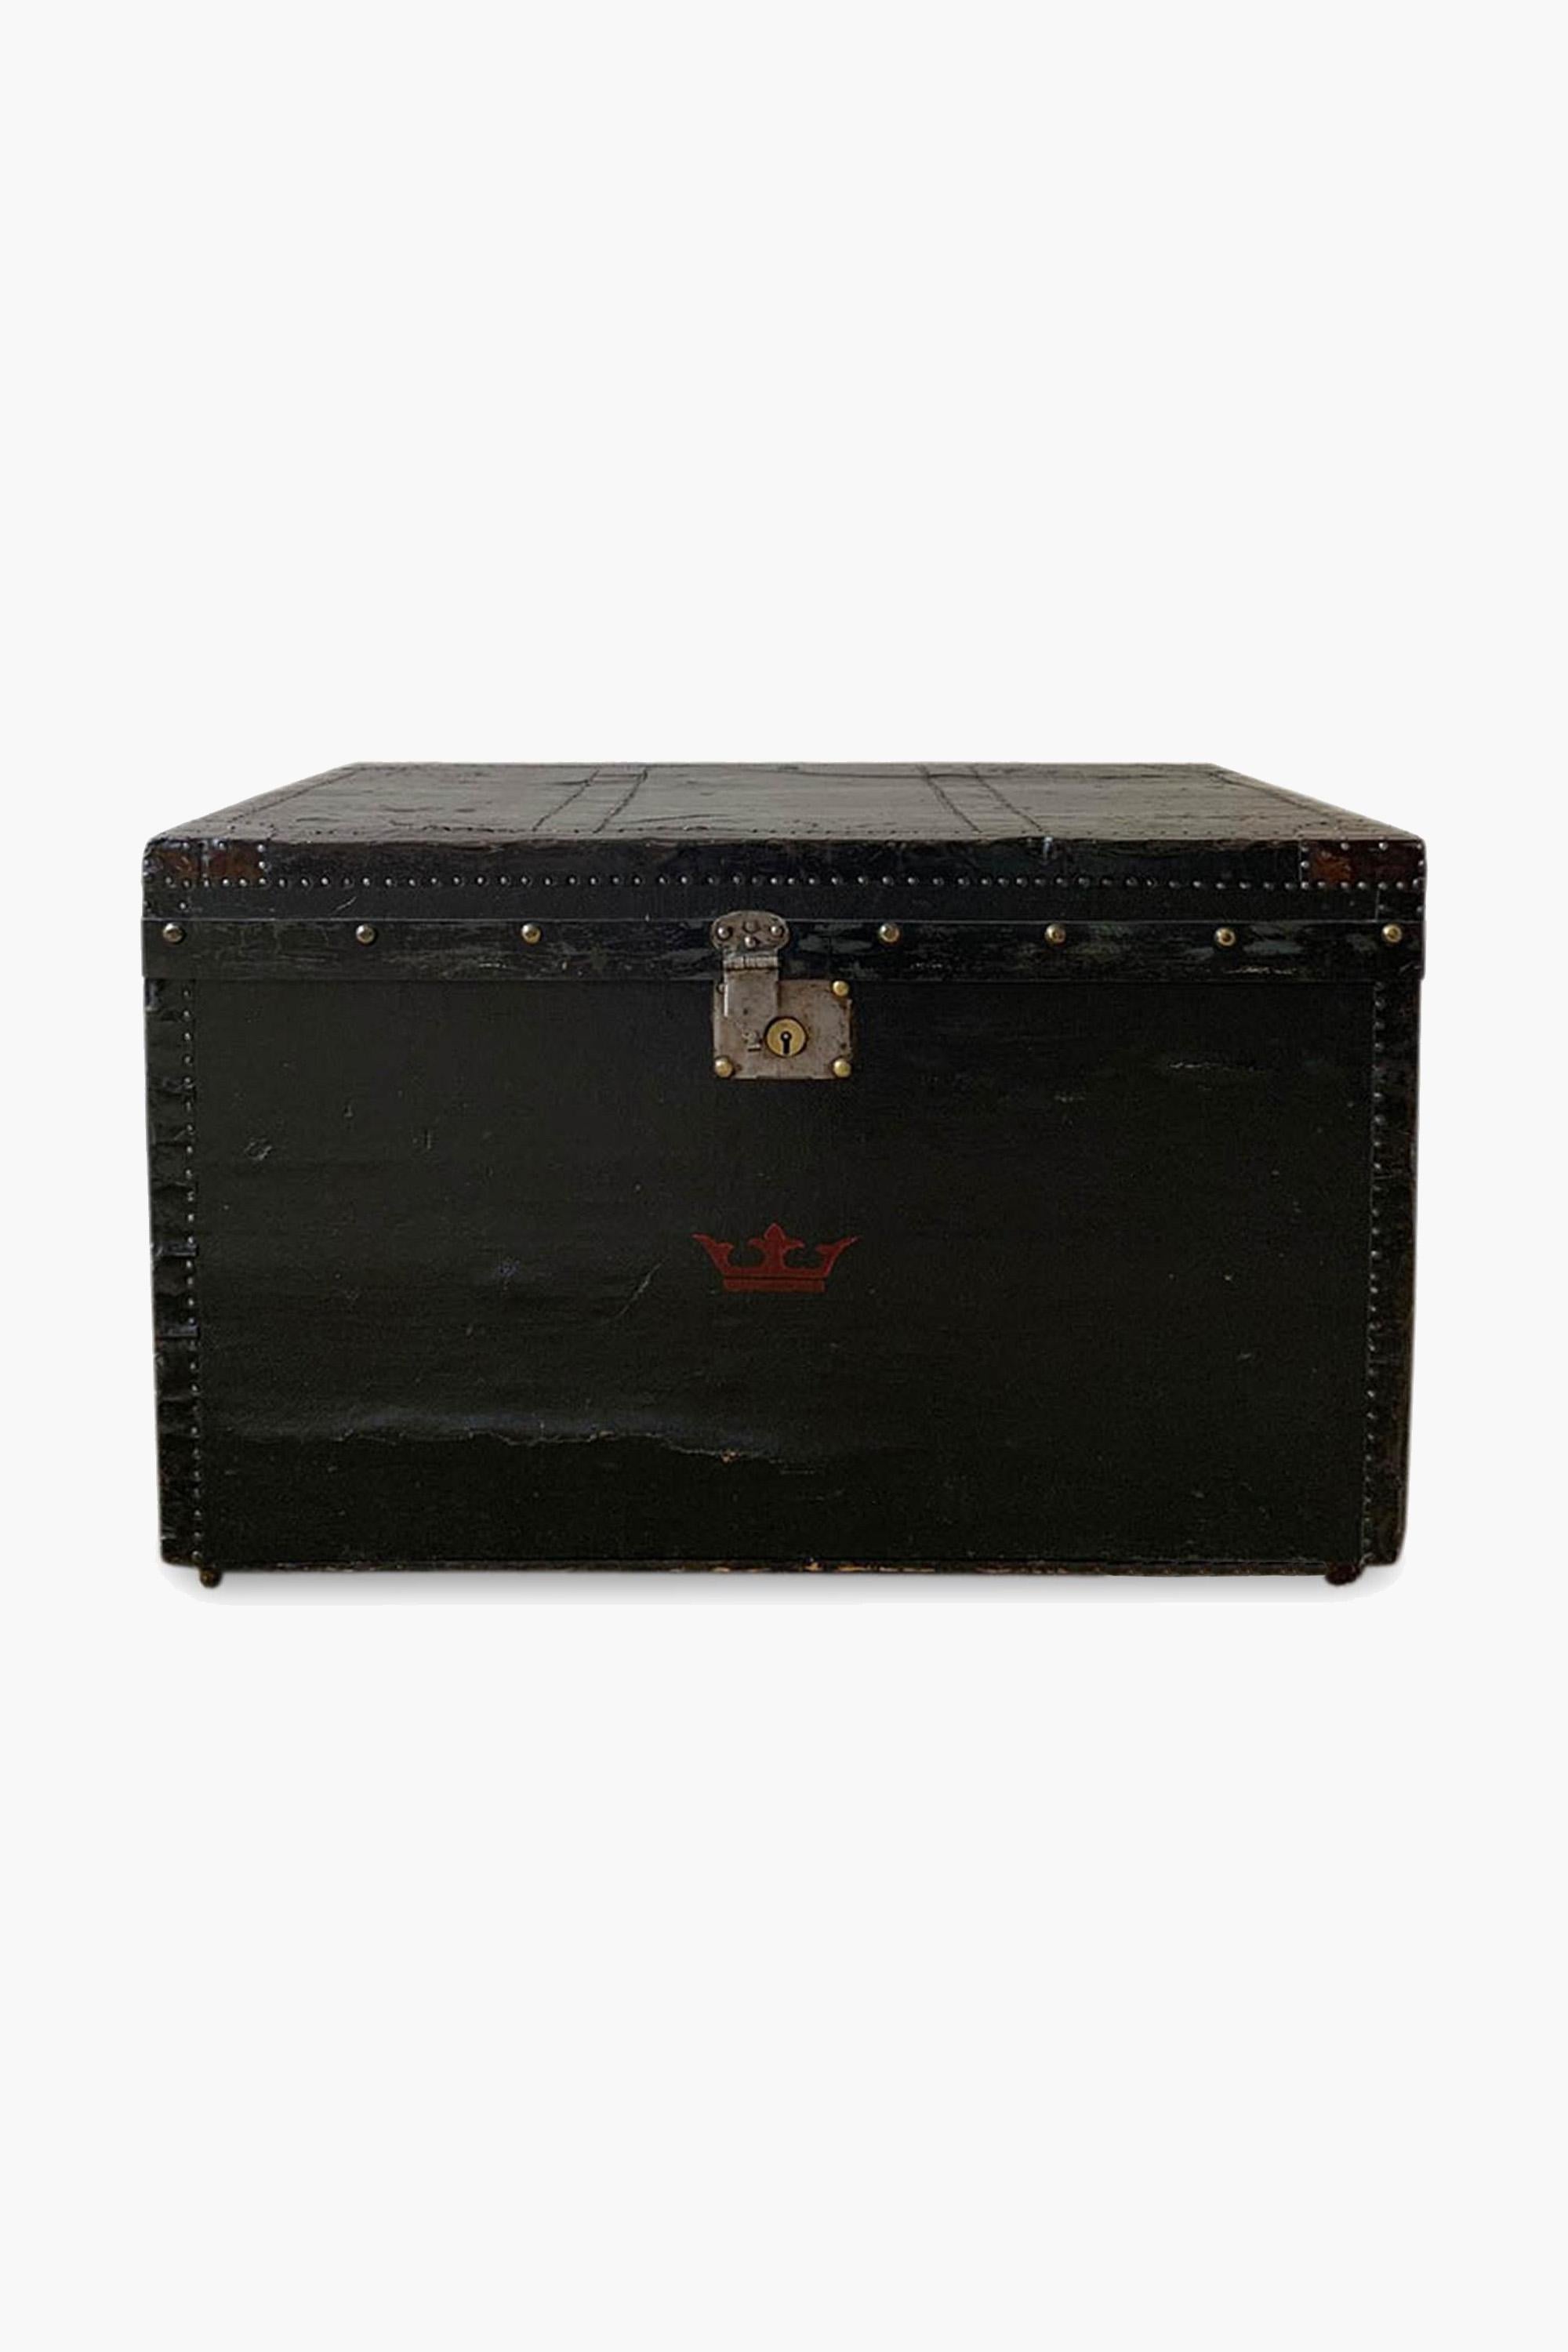 Faux Leather English Coaching Trunk, circa 1875 For Sale